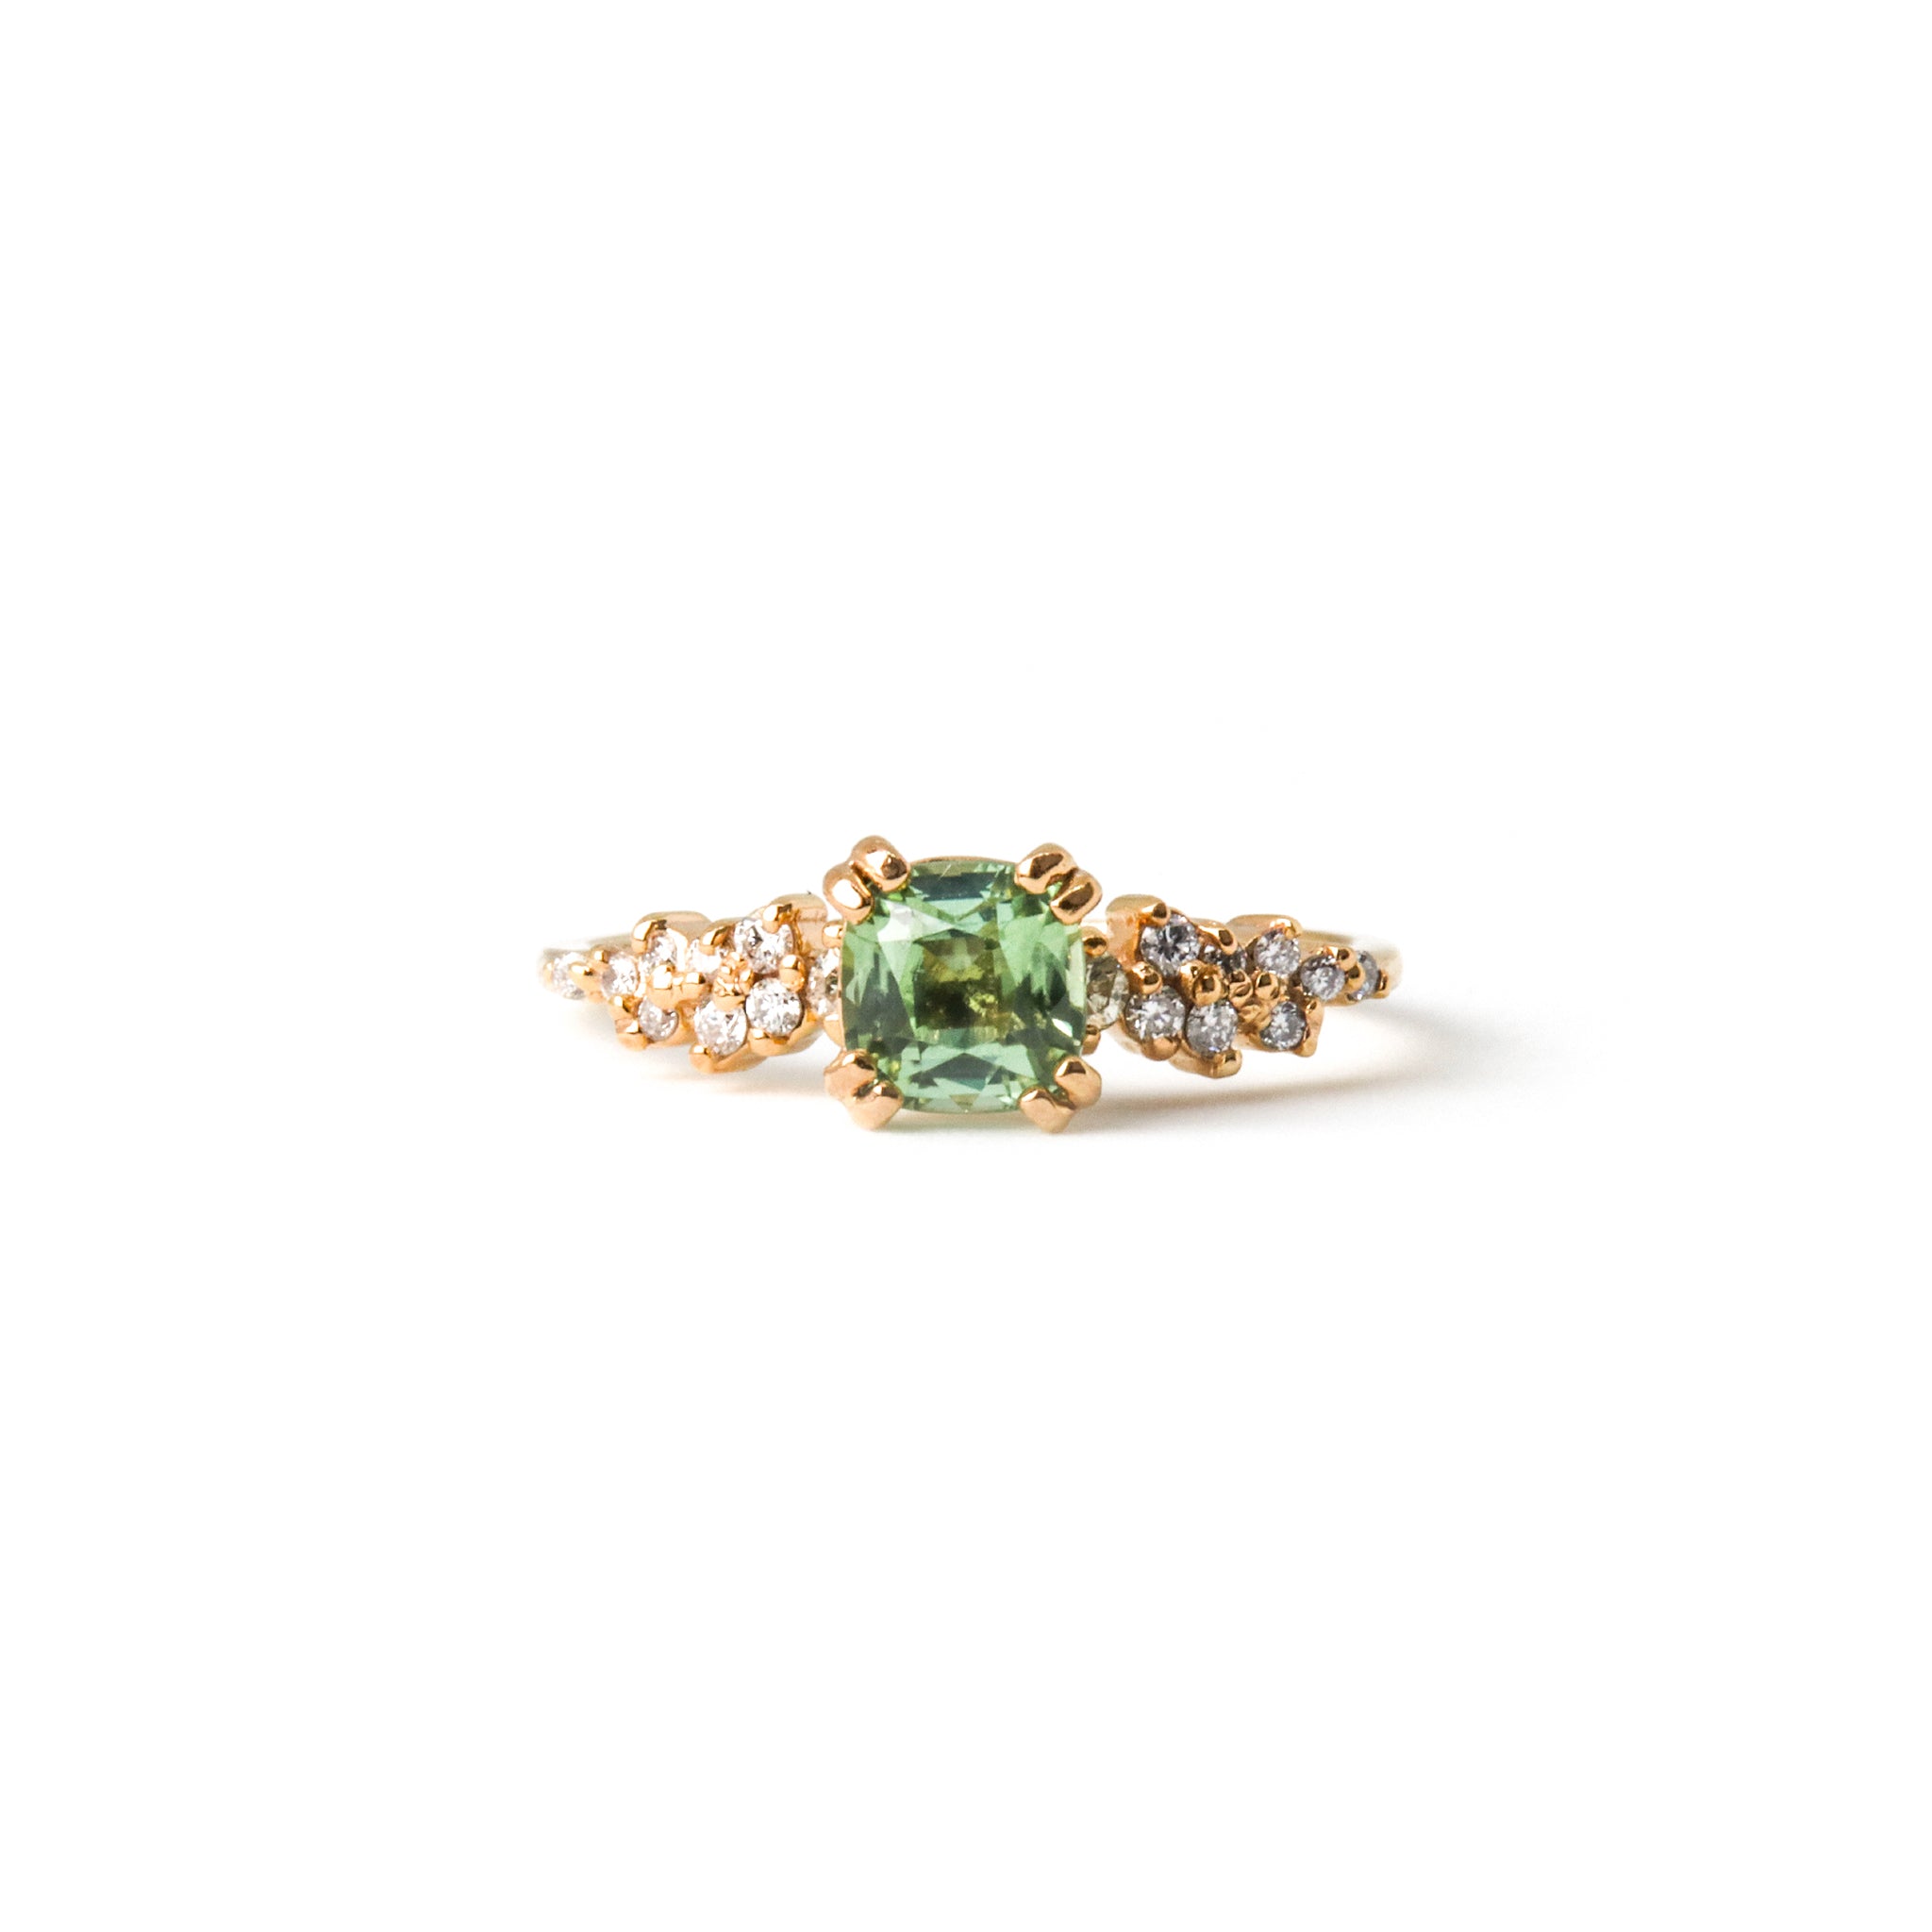 Ring with Cushion Cut Mint Green Tourmaline and Diamonds